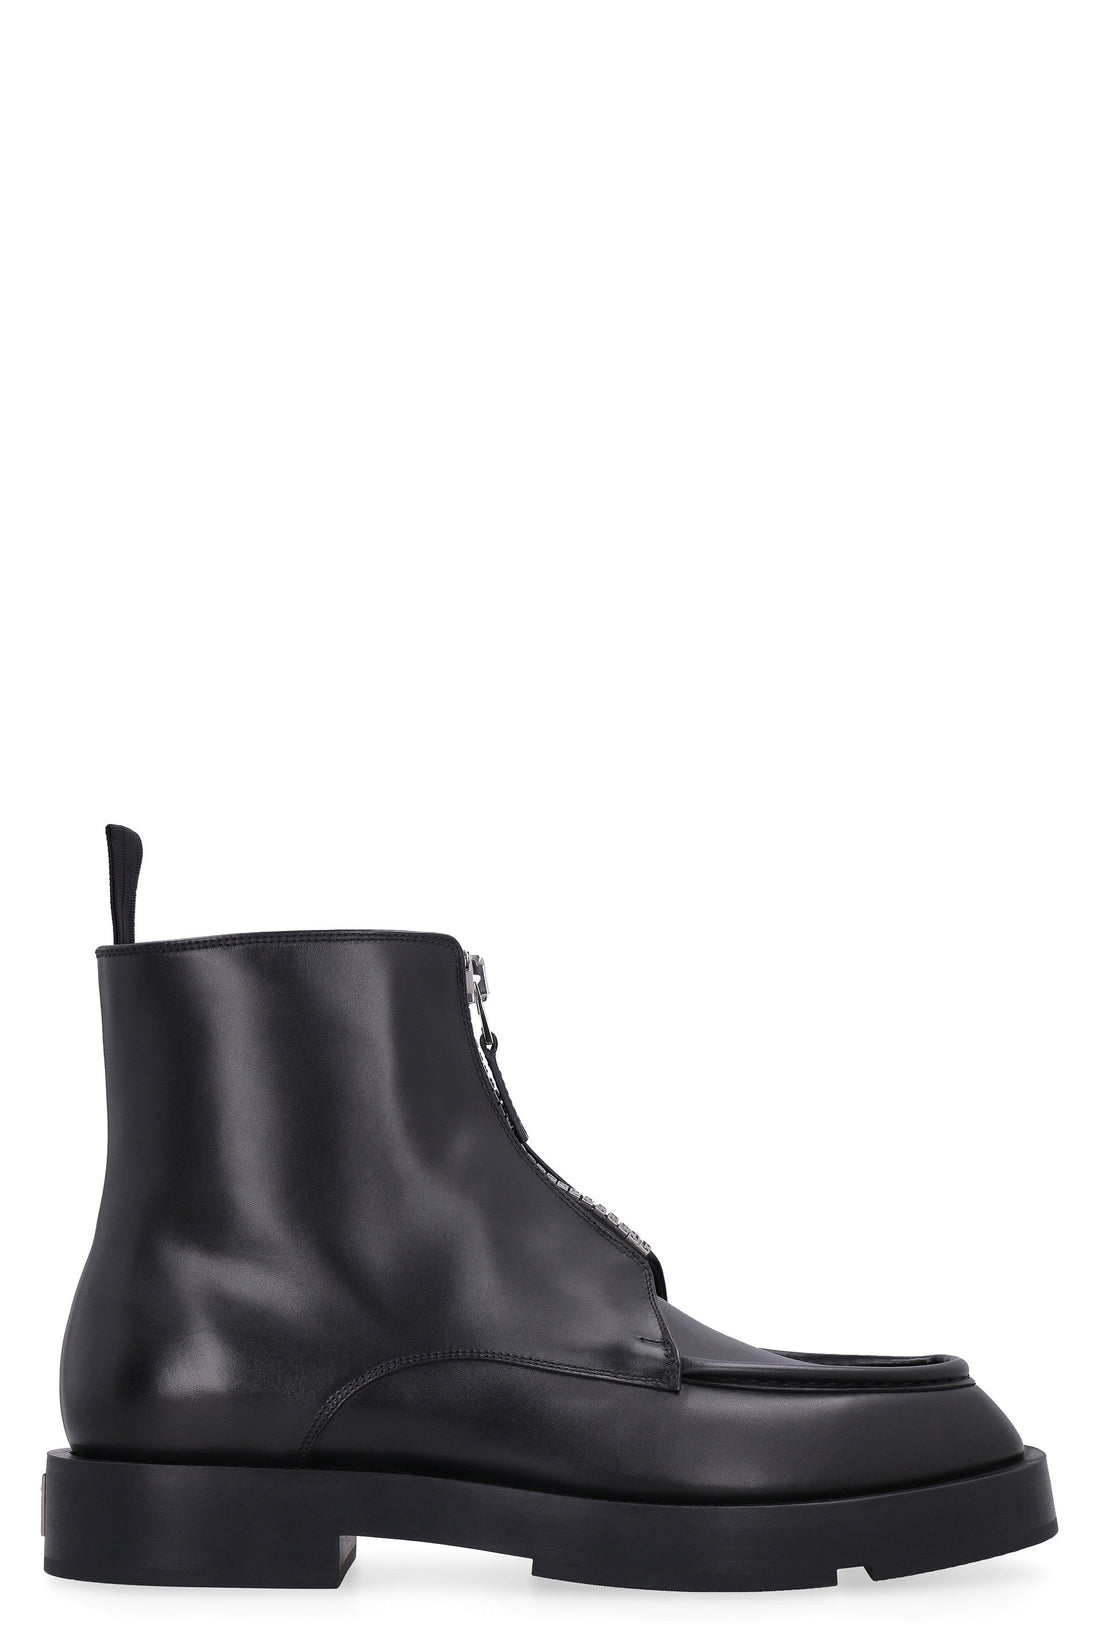 Givenchy-OUTLET-SALE-Squared leather ankle boots-ARCHIVIST